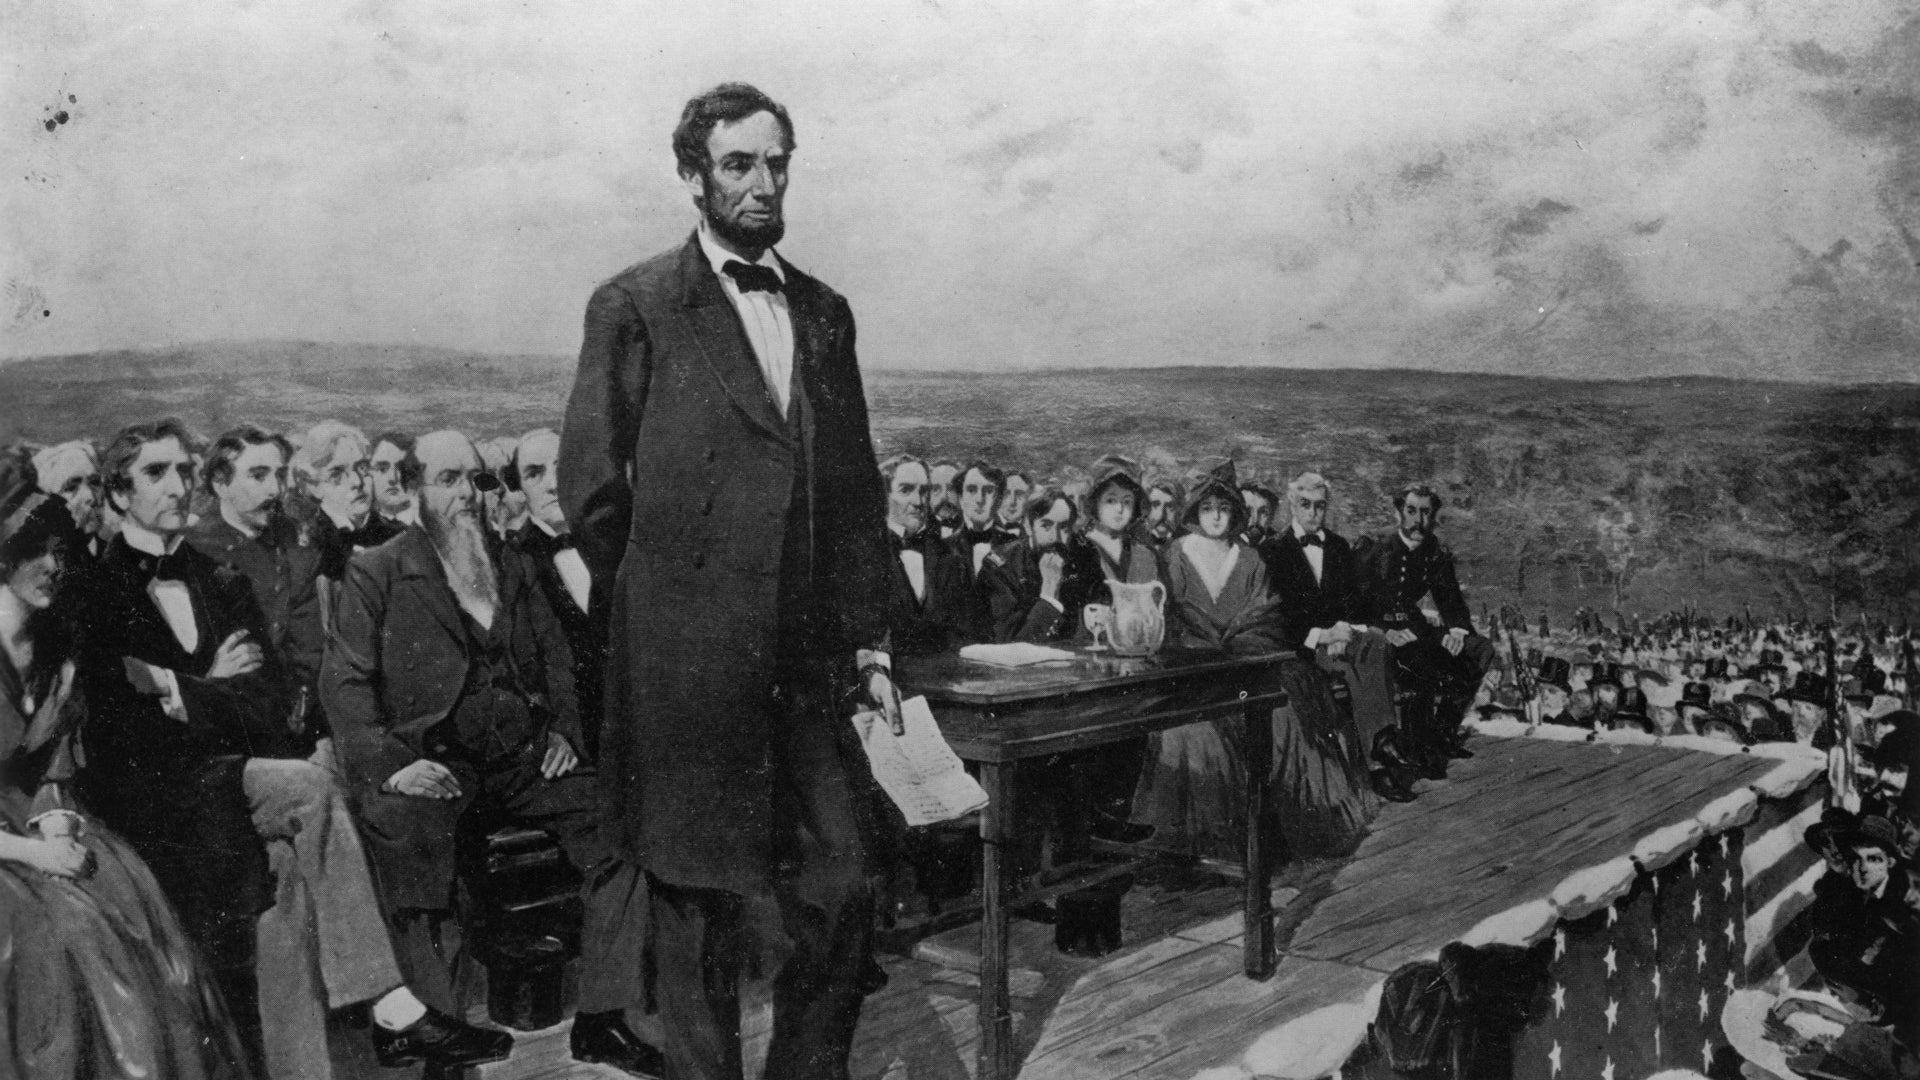 the featured speaker at Gettysburg was Edward Everett, not Lincoln. He gave a 2 hour speech preceding the Gettysburg Address. After, he wrote to Lincoln "I should be glad if I could flatter myself that I came as near to the central idea of the occasion, in two hours, as you did in two minutes."